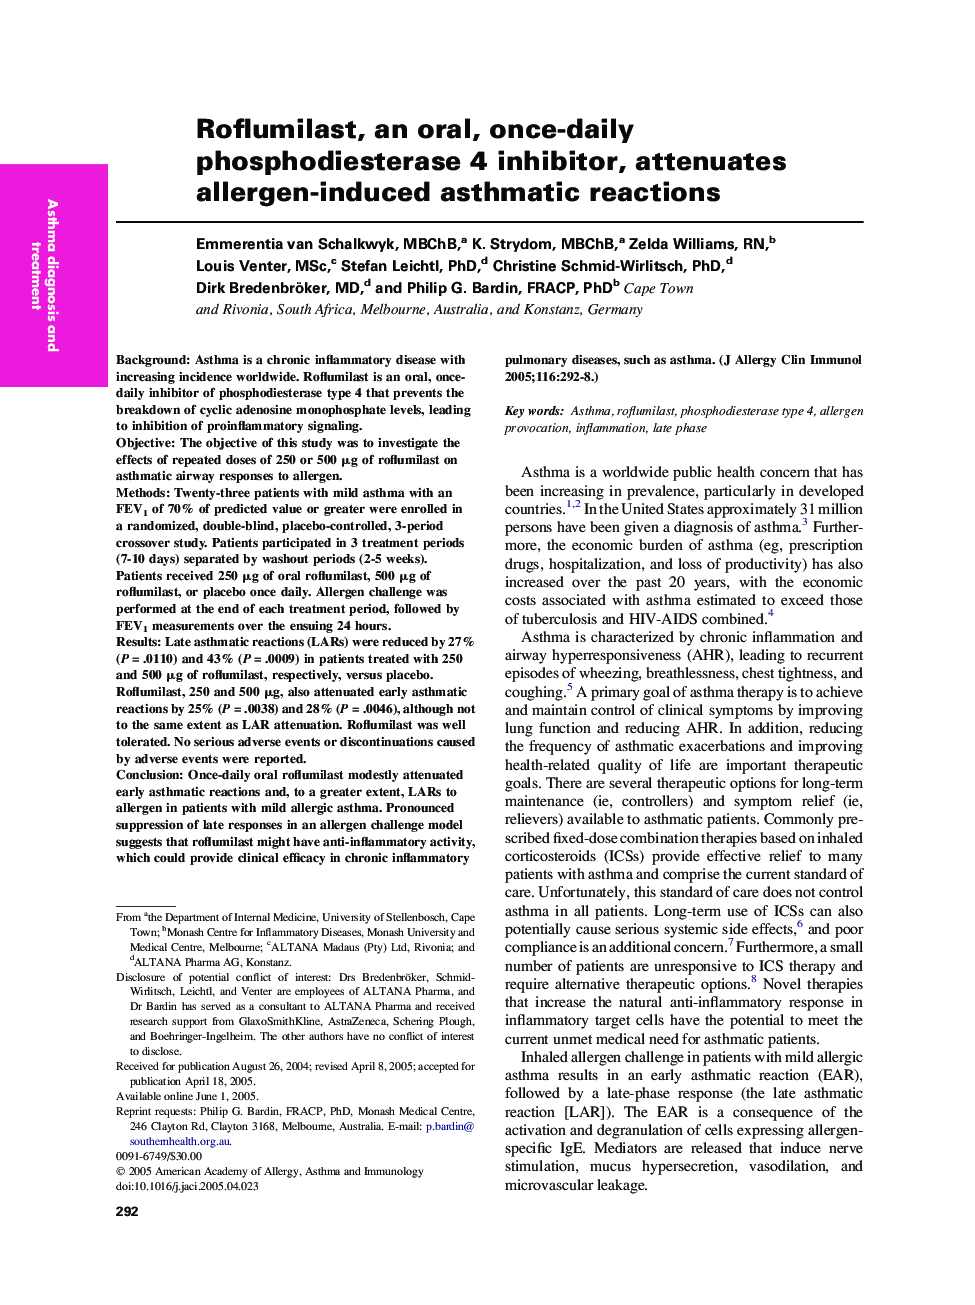 Roflumilast, an oral, once-daily phosphodiesterase 4 inhibitor, attenuates allergen-induced asthmatic reactions